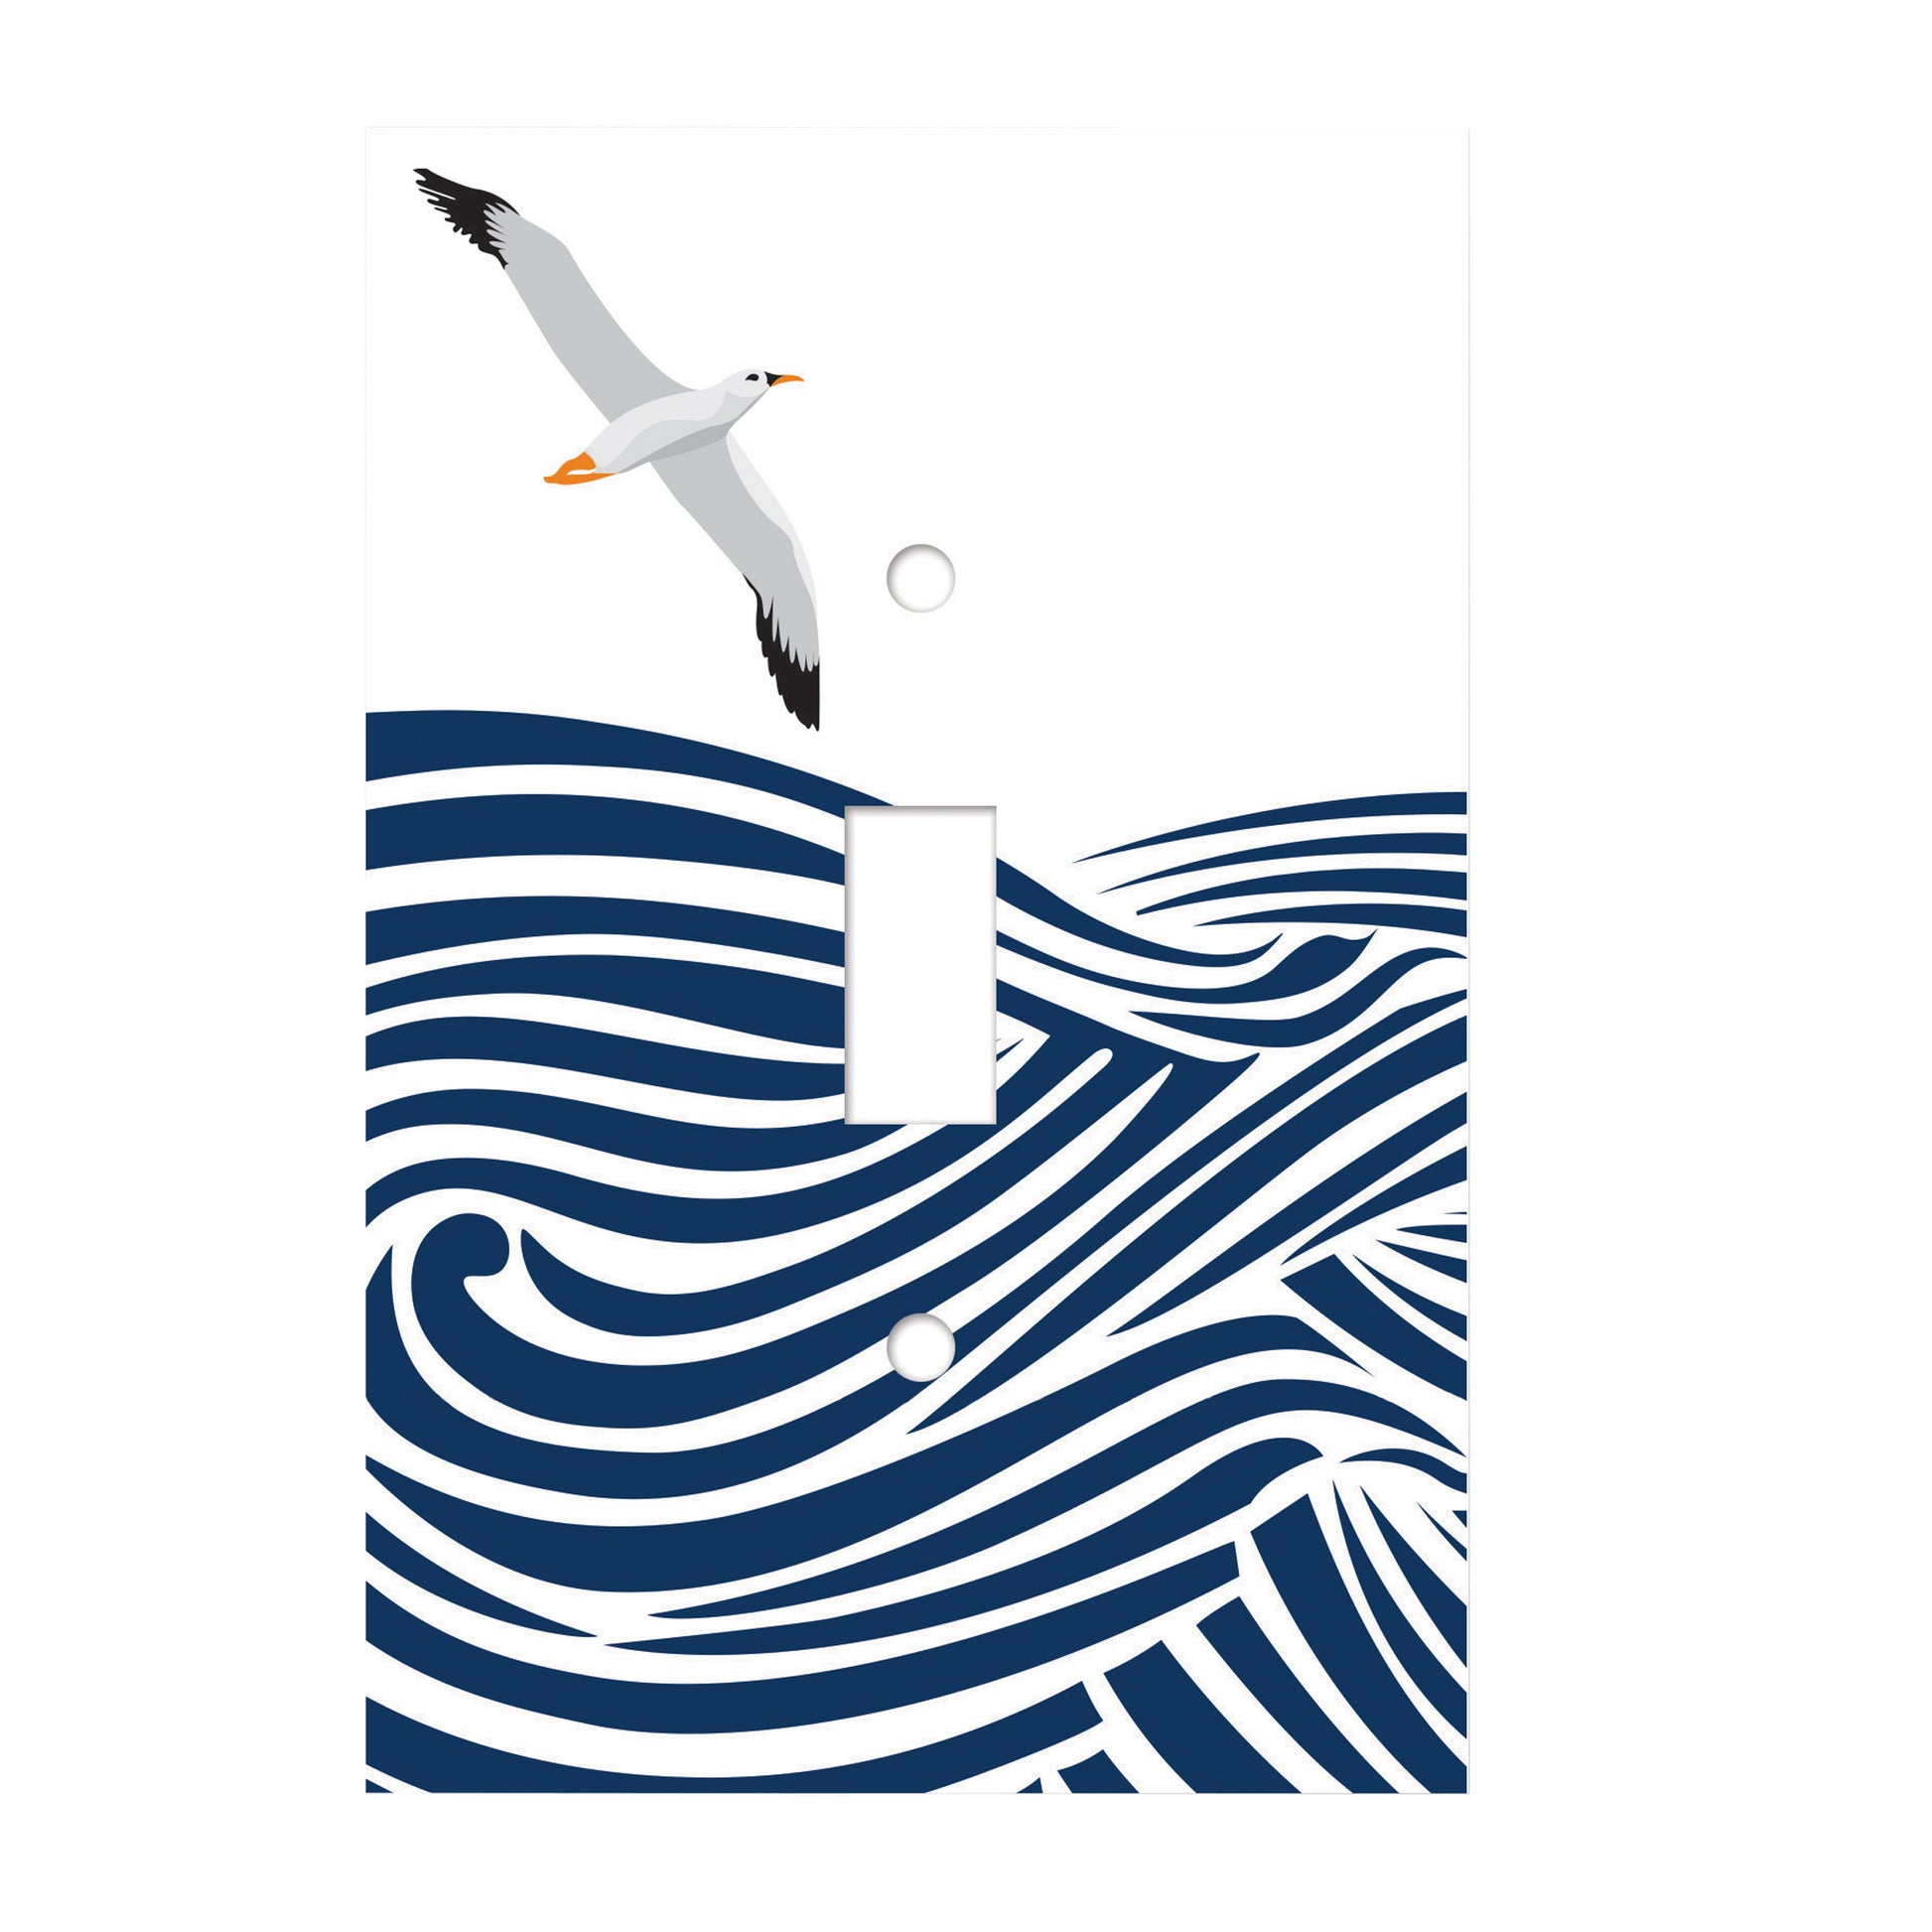 ceramic single toggle switchplate featuring illustration of albatross flying above waves. 